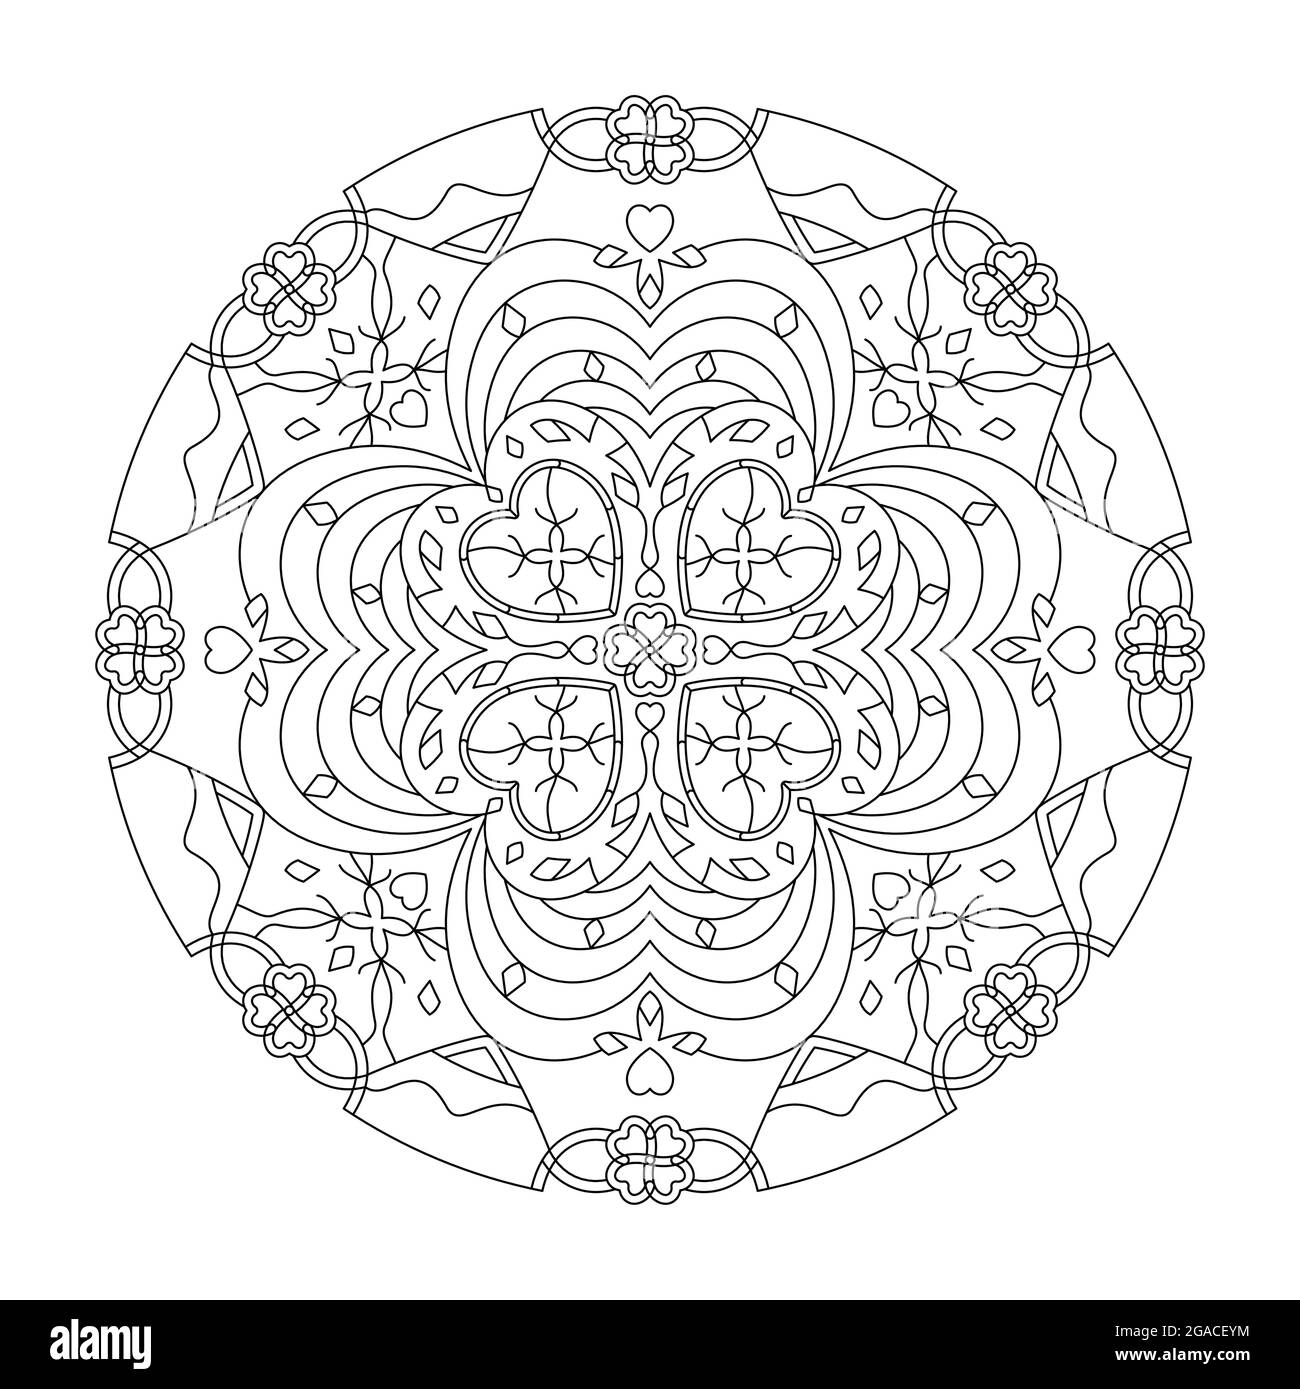 Mandala. Heart and four-leaf clover. Anti-stress coloring page. Art Therapy. Vector illustration black and white. Stock Vector